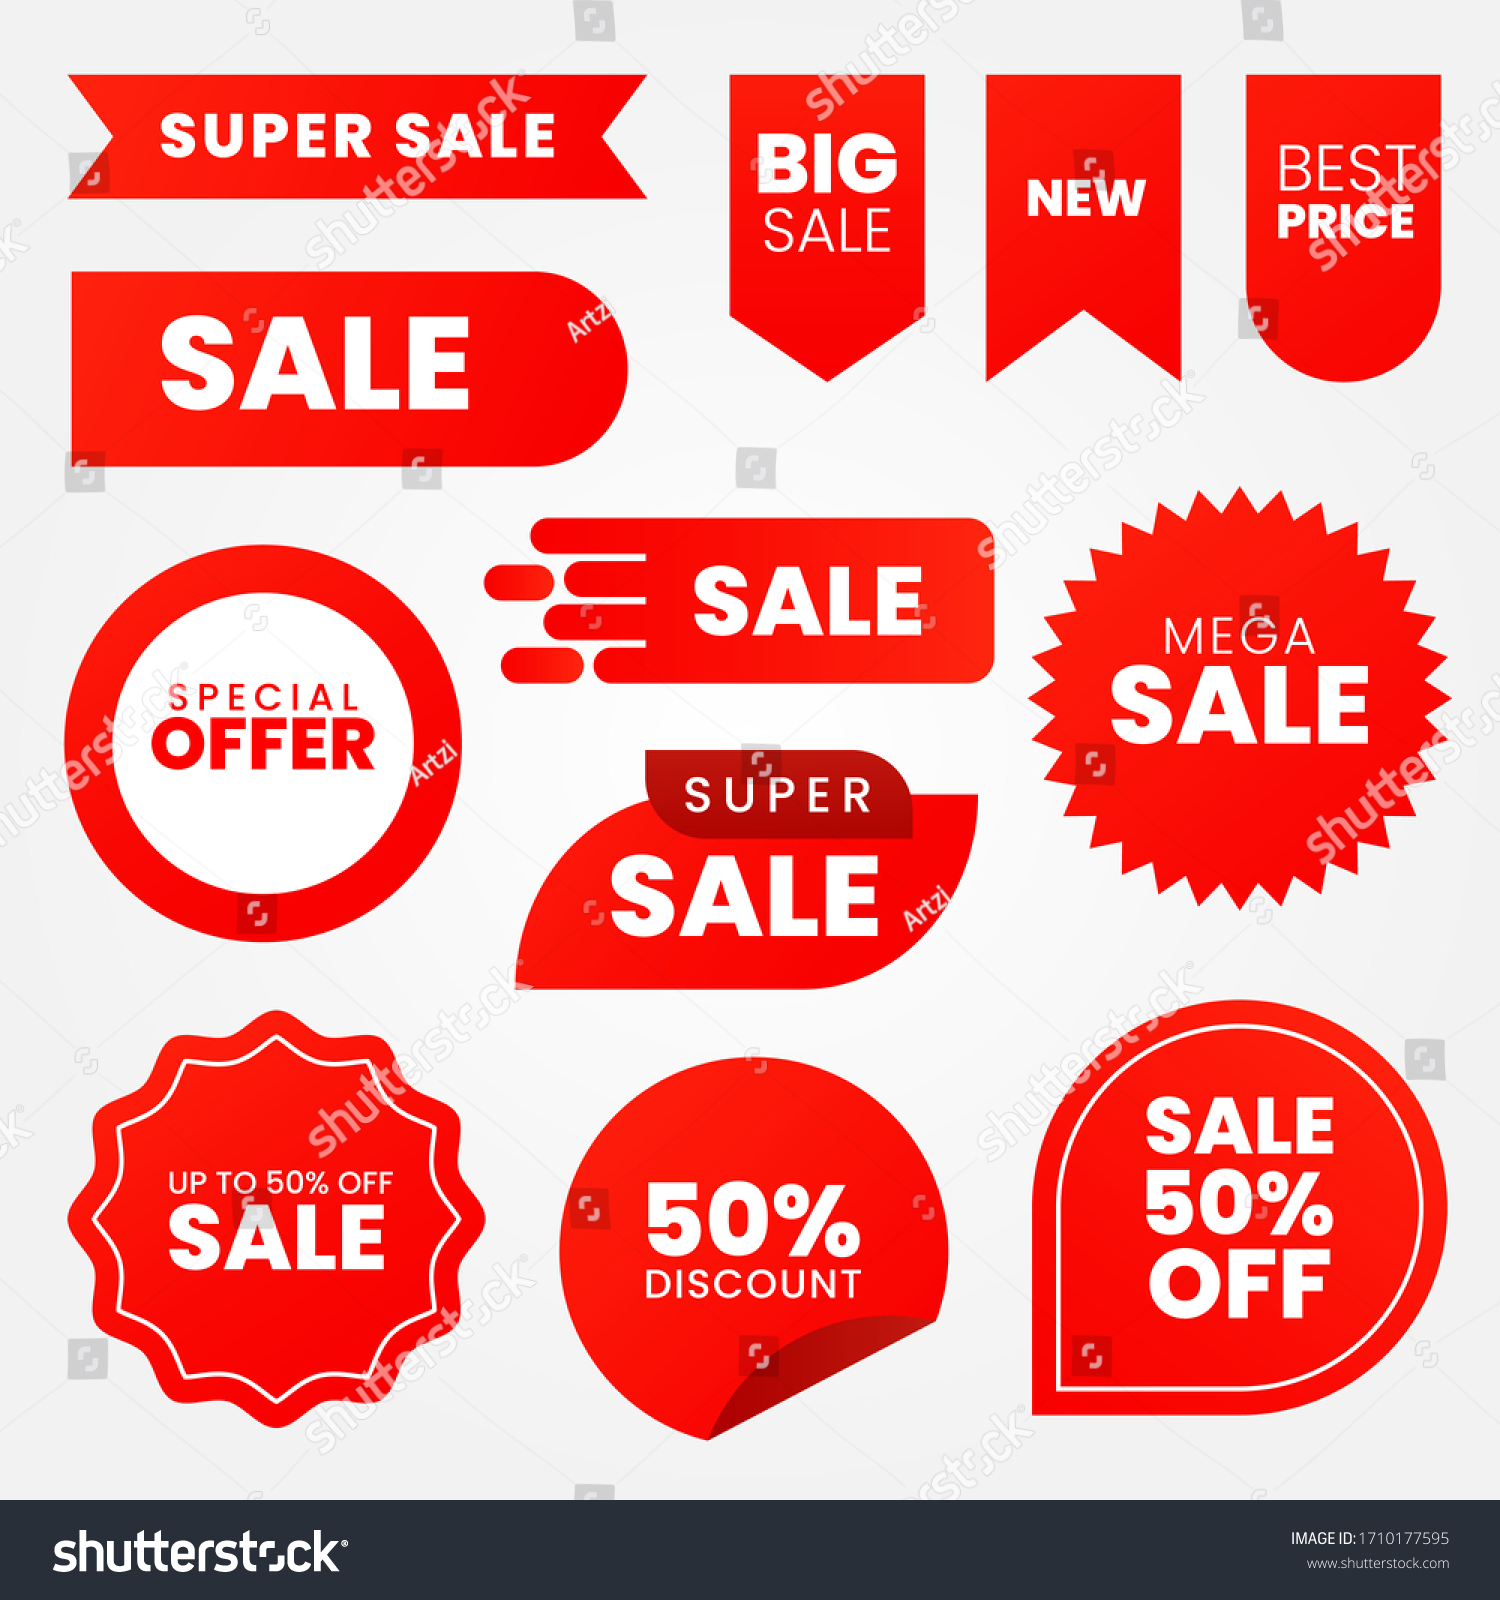 Sale - creative banner set vector illustration.concept discount promotion layout on white background #1710177595